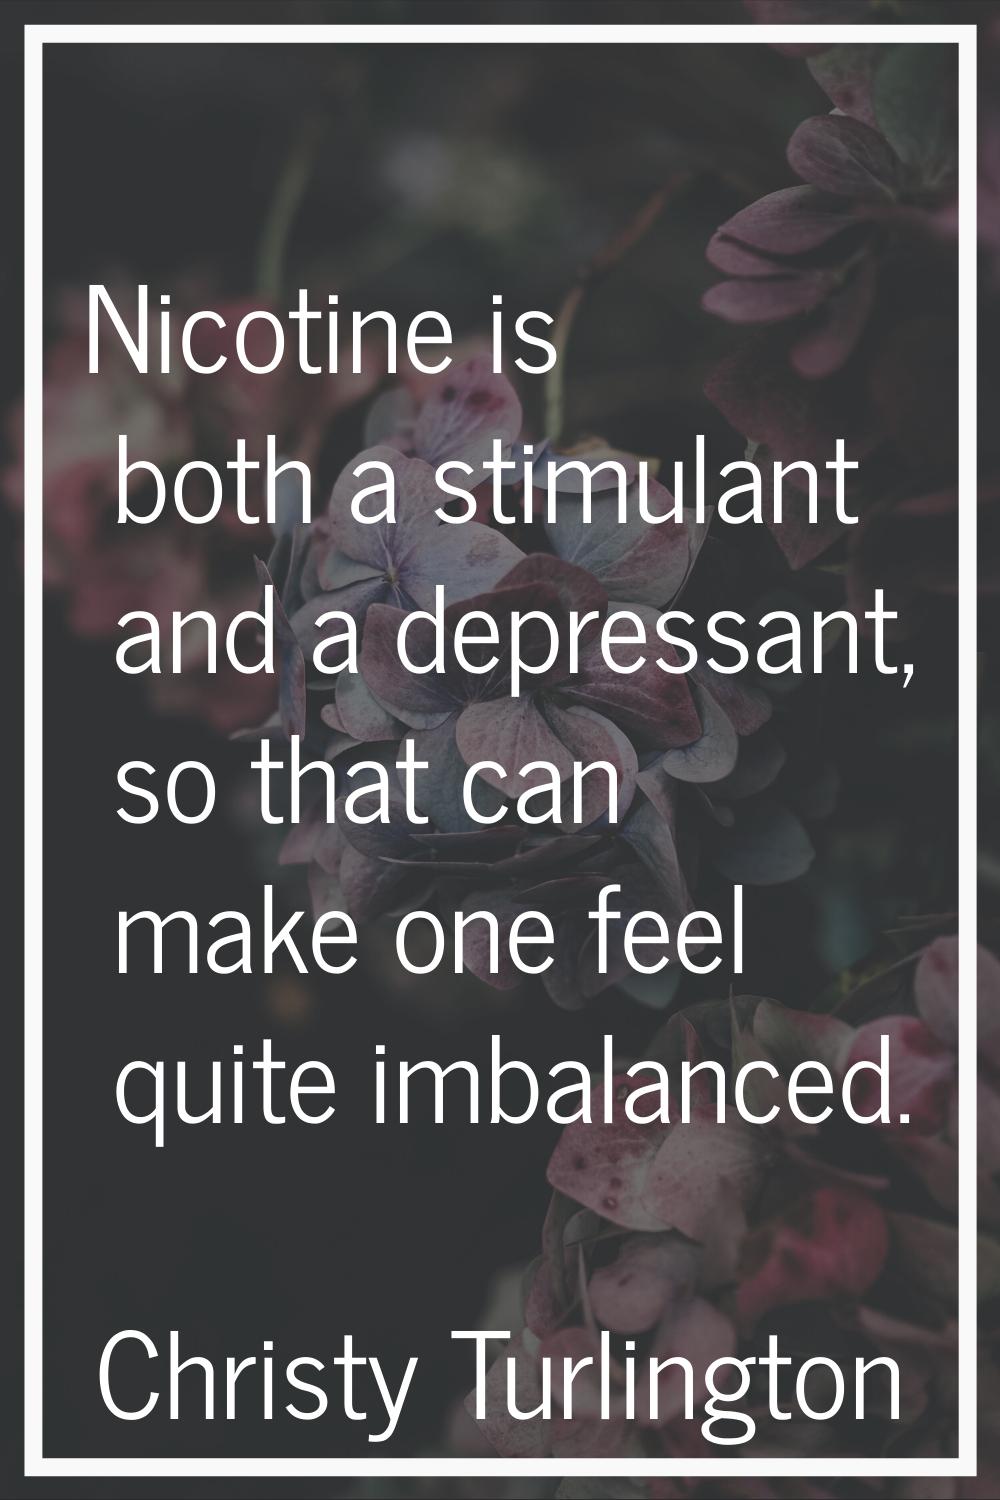 Nicotine is both a stimulant and a depressant, so that can make one feel quite imbalanced.